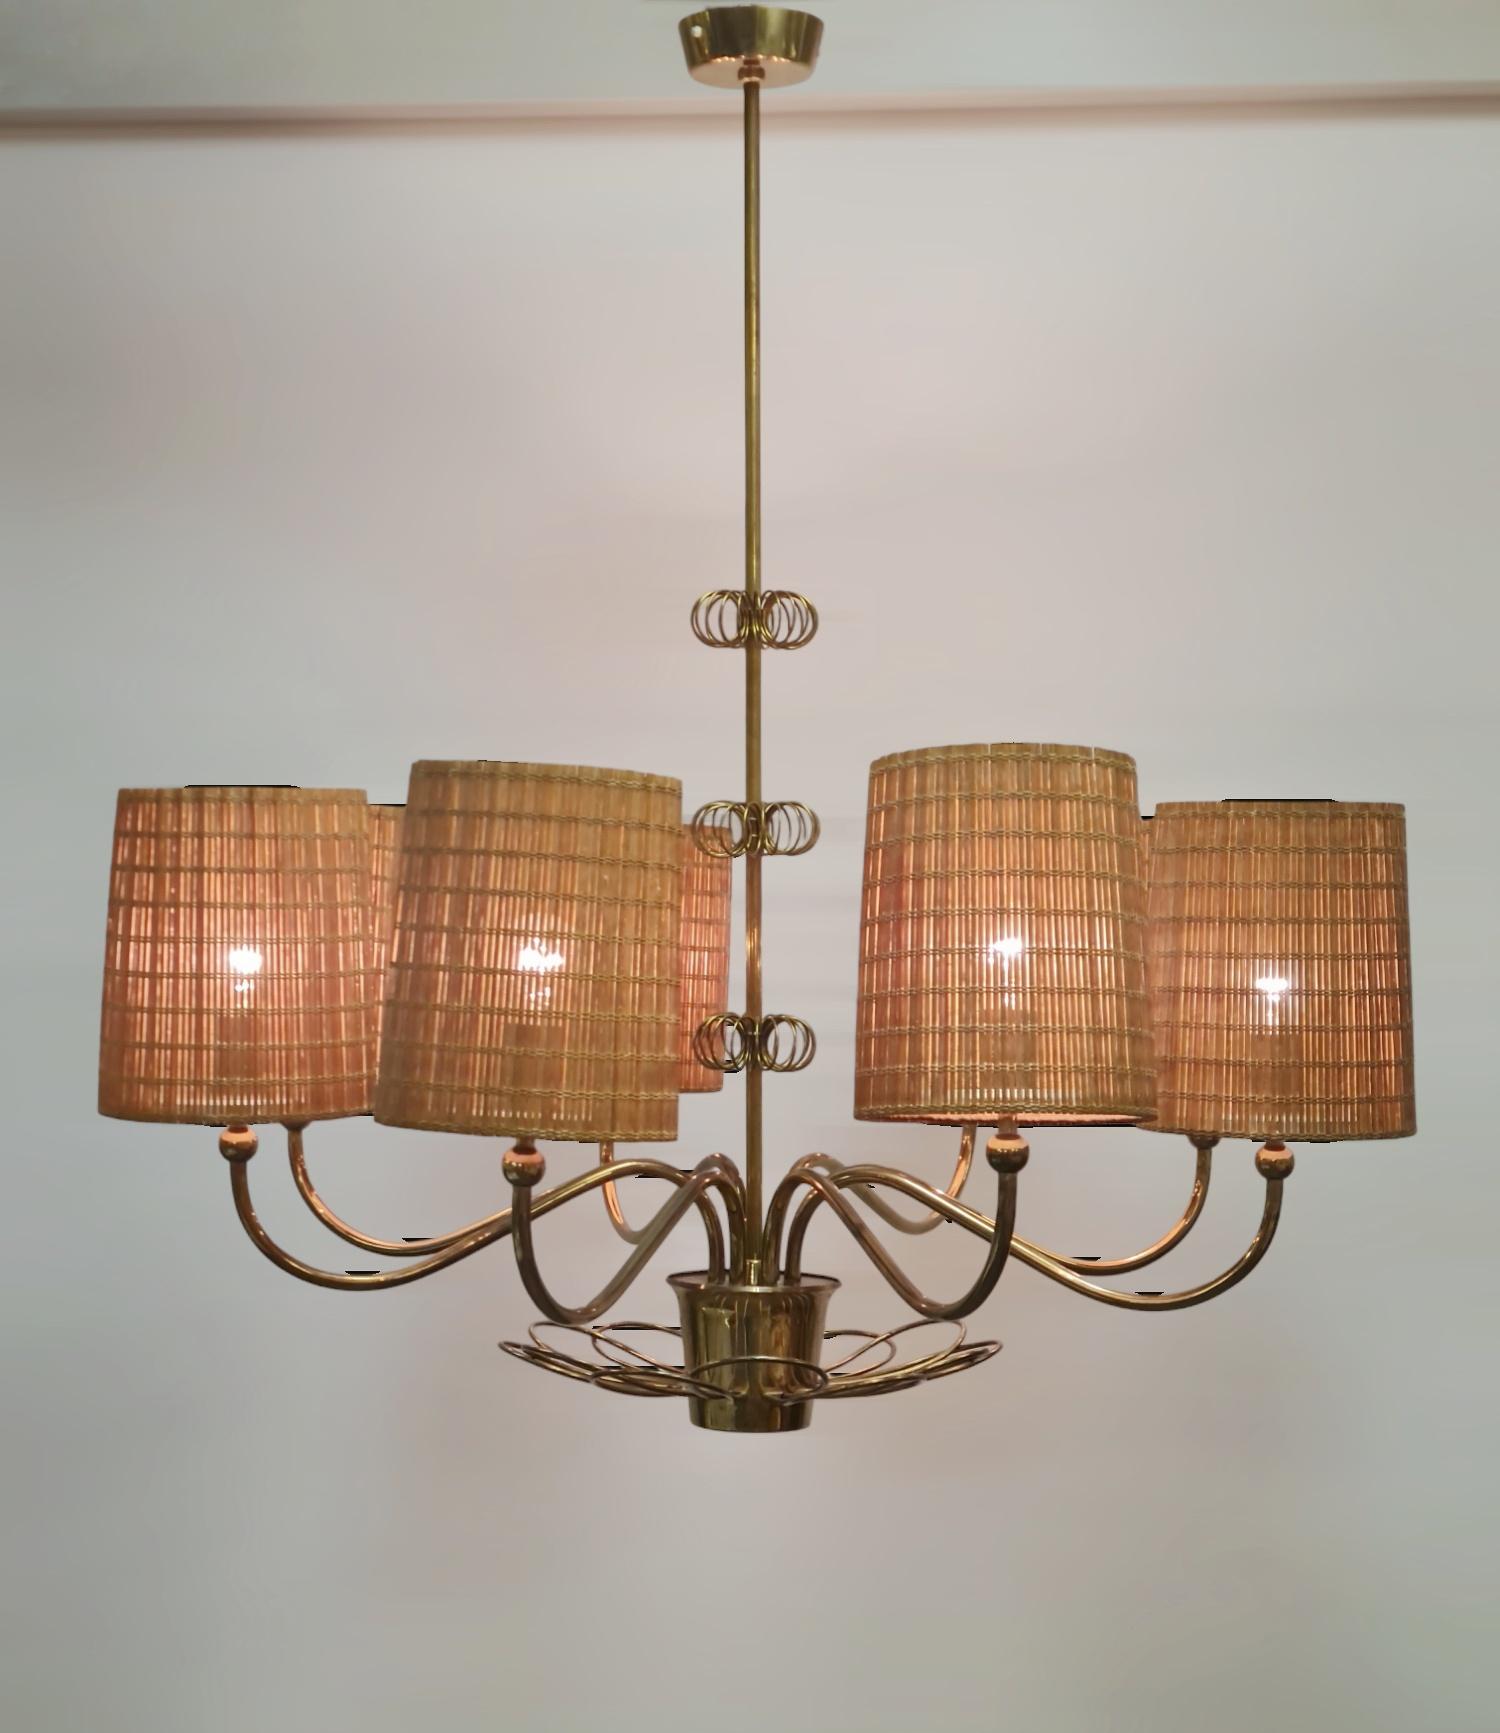 A Paavo Tynell Commissioned Chandelier, 1950s For Sale 8